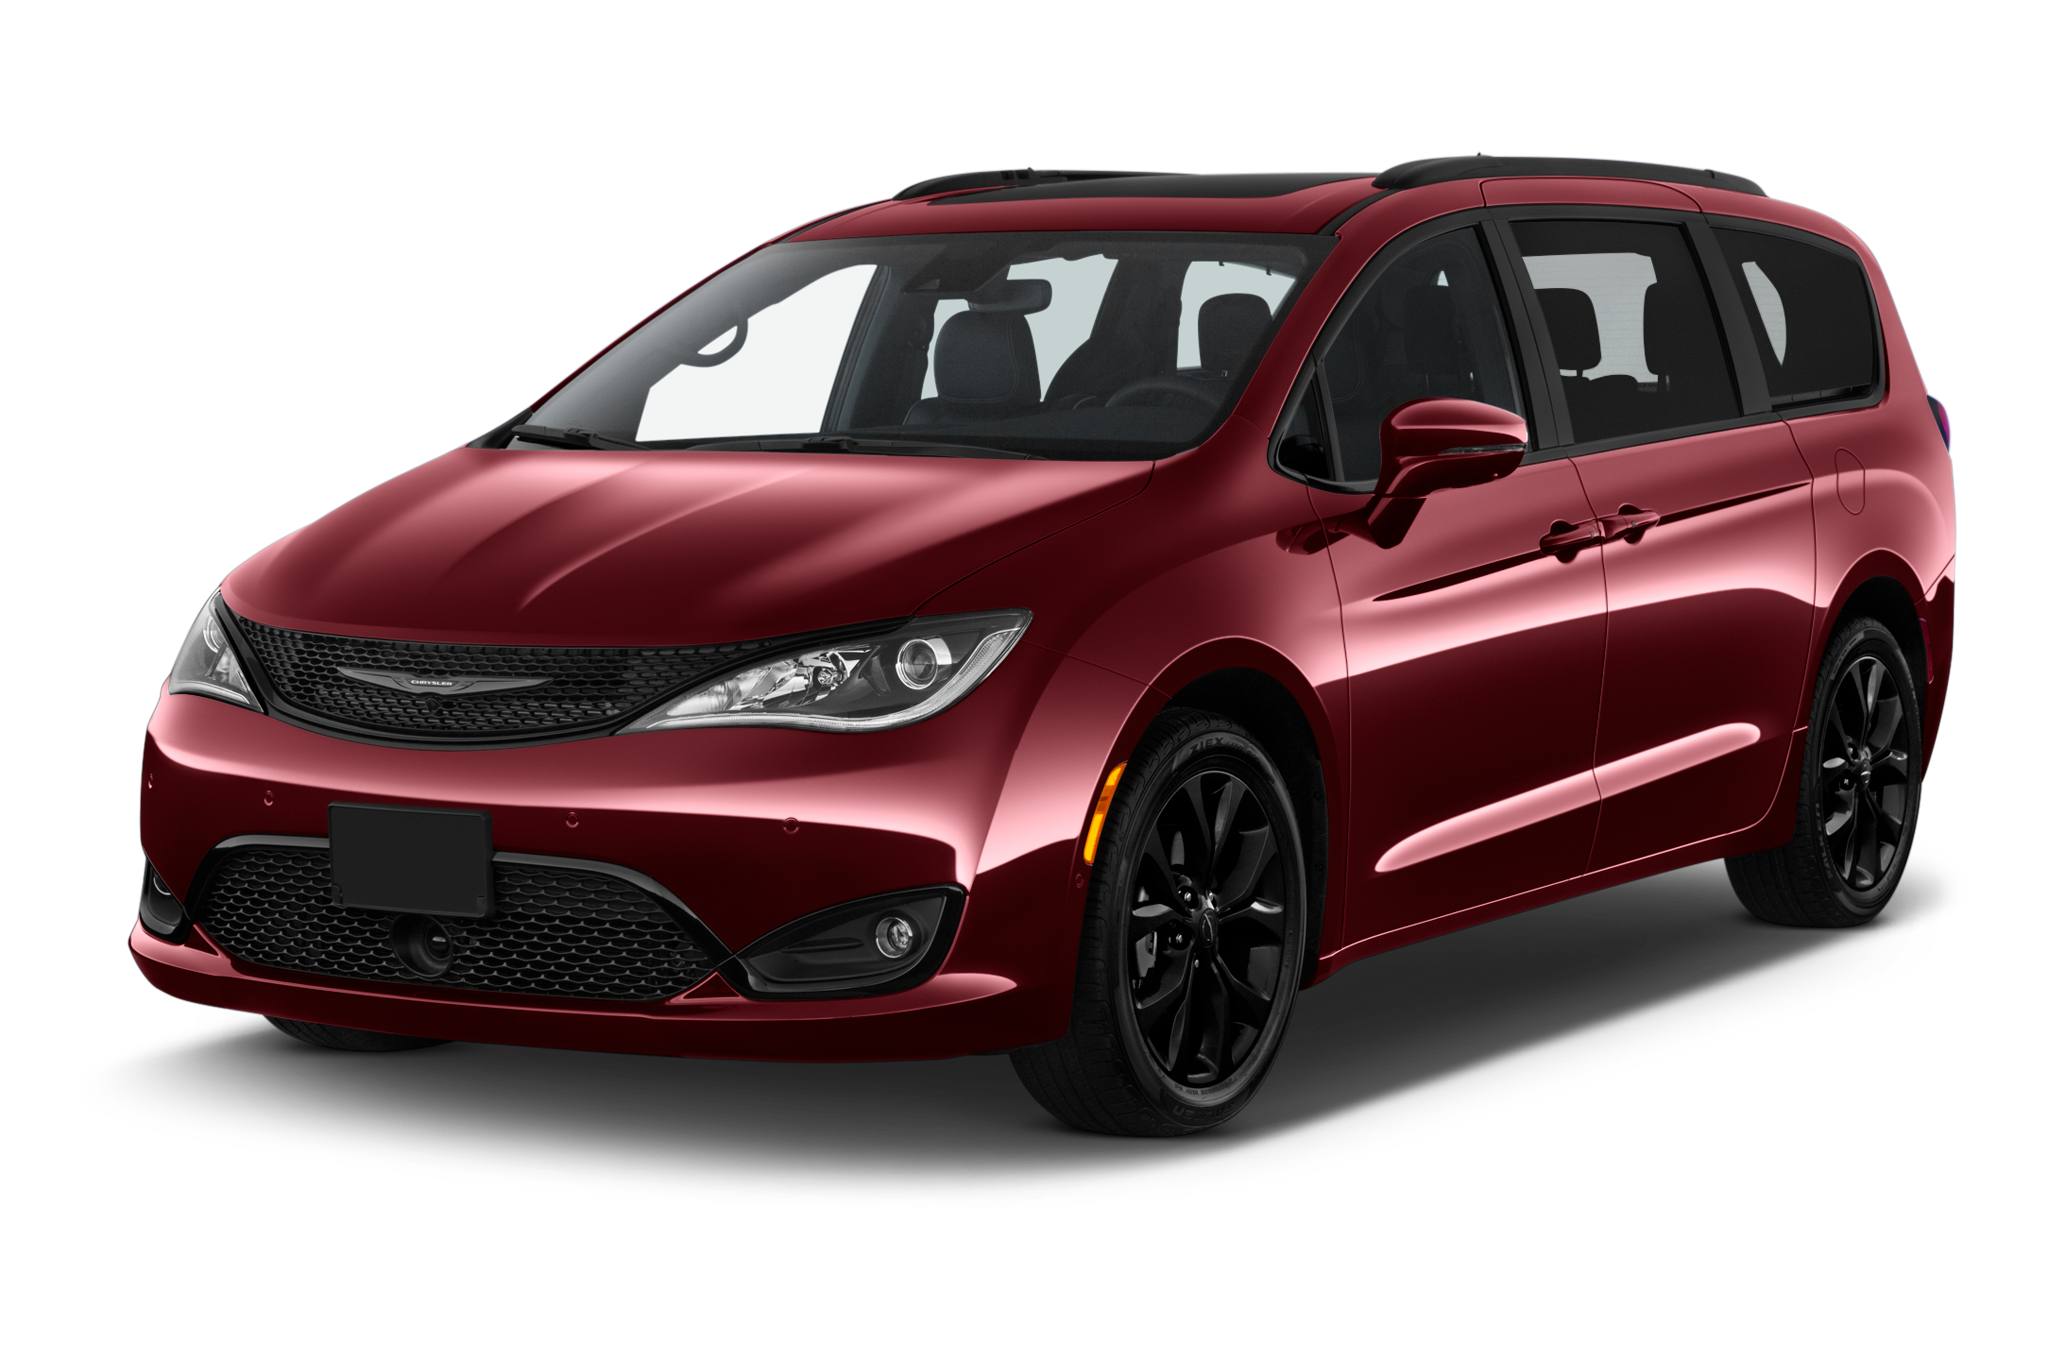 2020 Chrysler Pacifica Specs and features MSN Autos